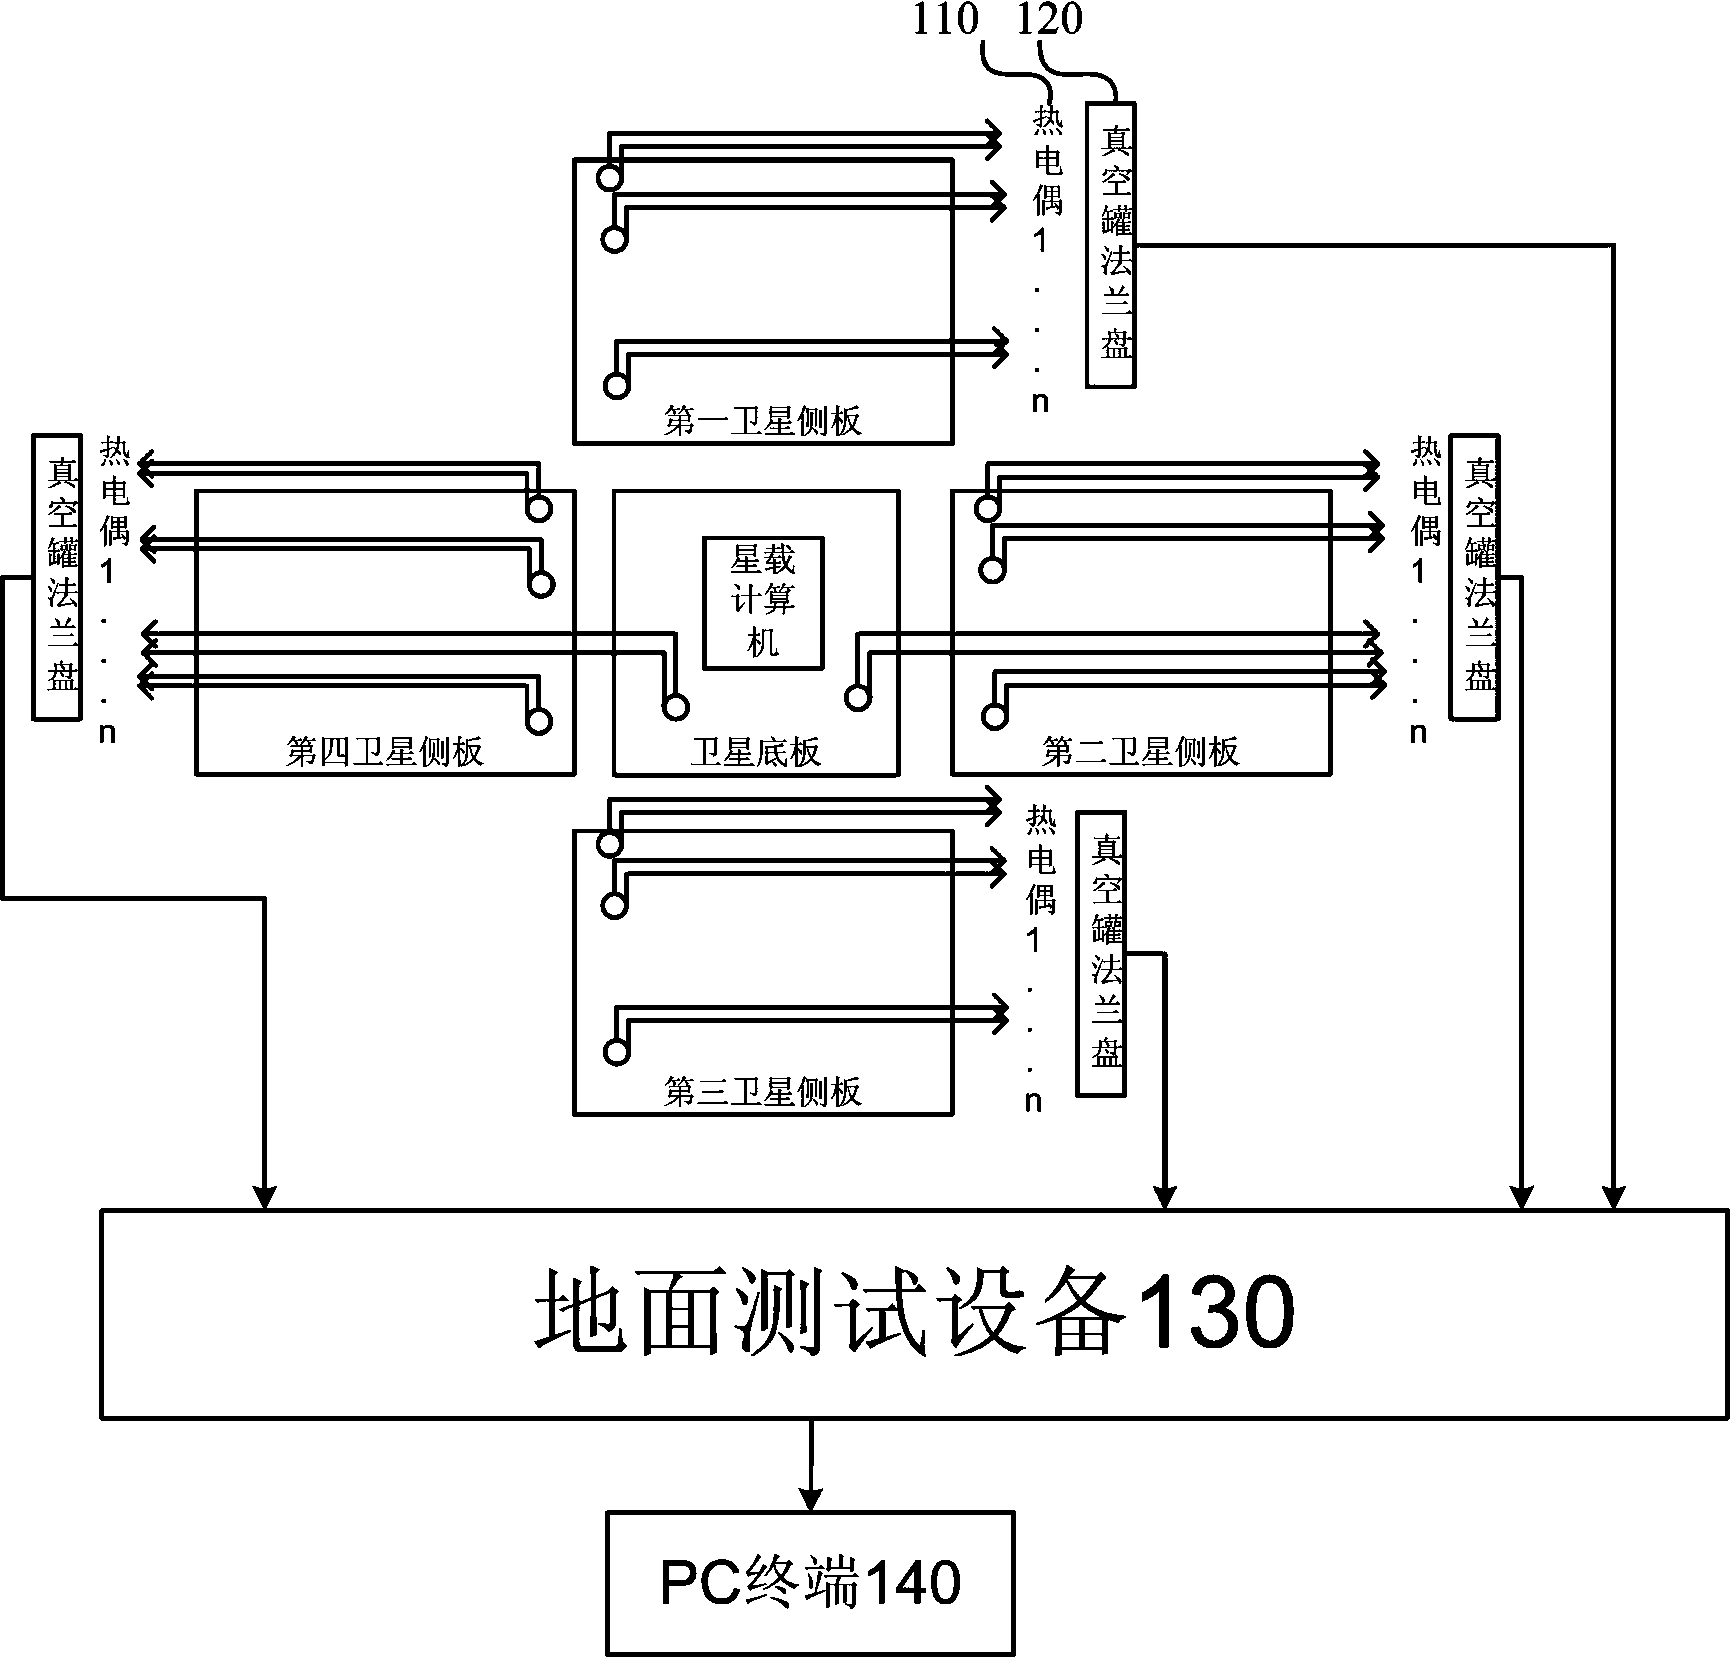 Temperature processing device and method in satellite thermal test